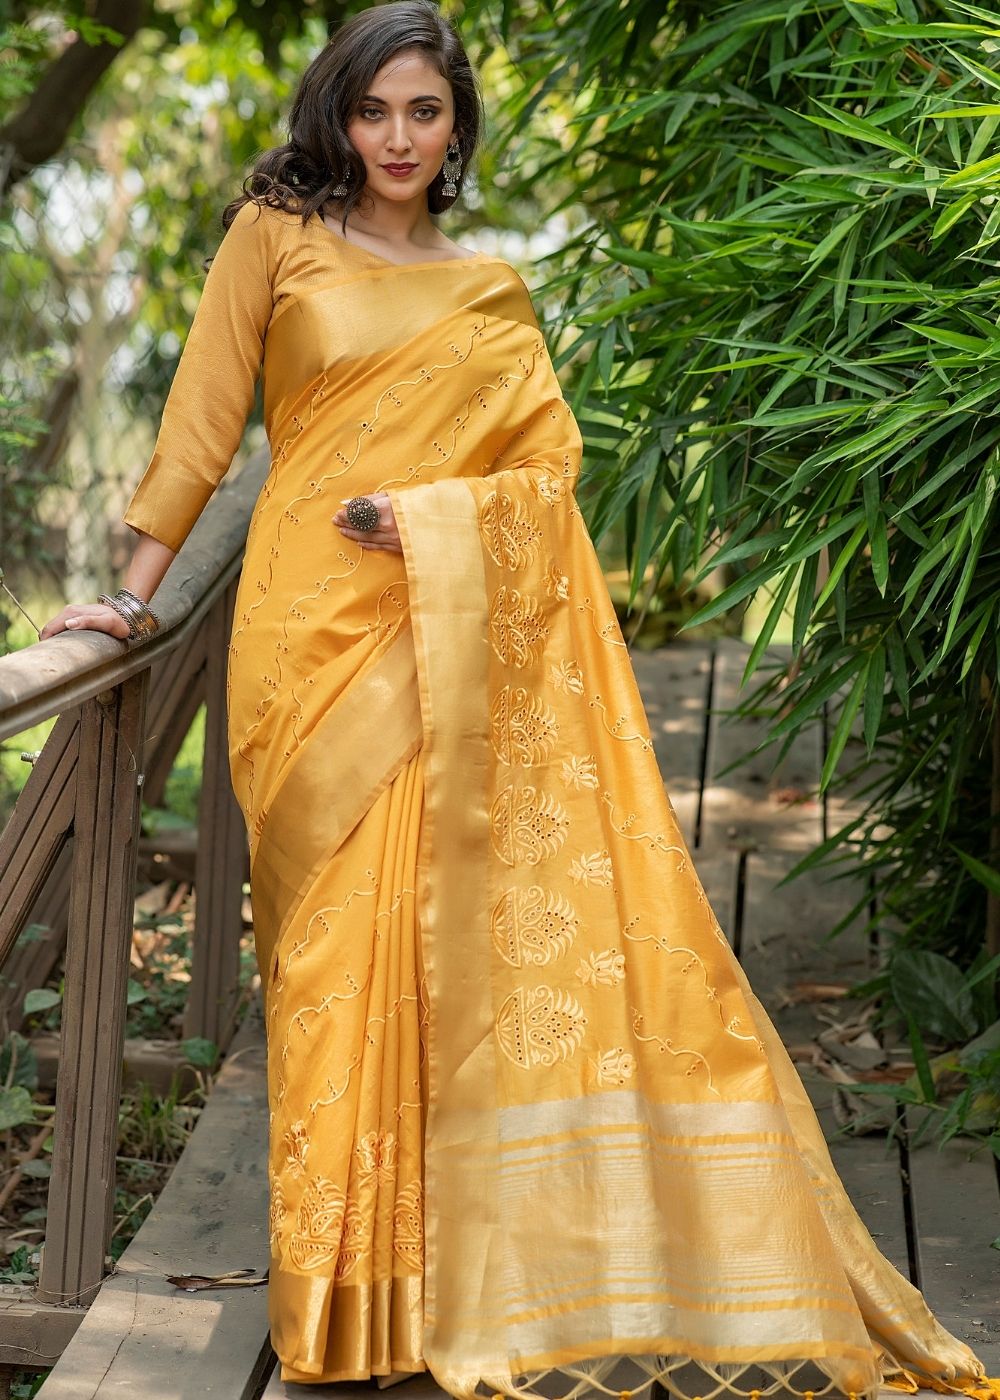 Gold Yellow Assam Silk Saree with Cut-Work Embroidery – Ethnos